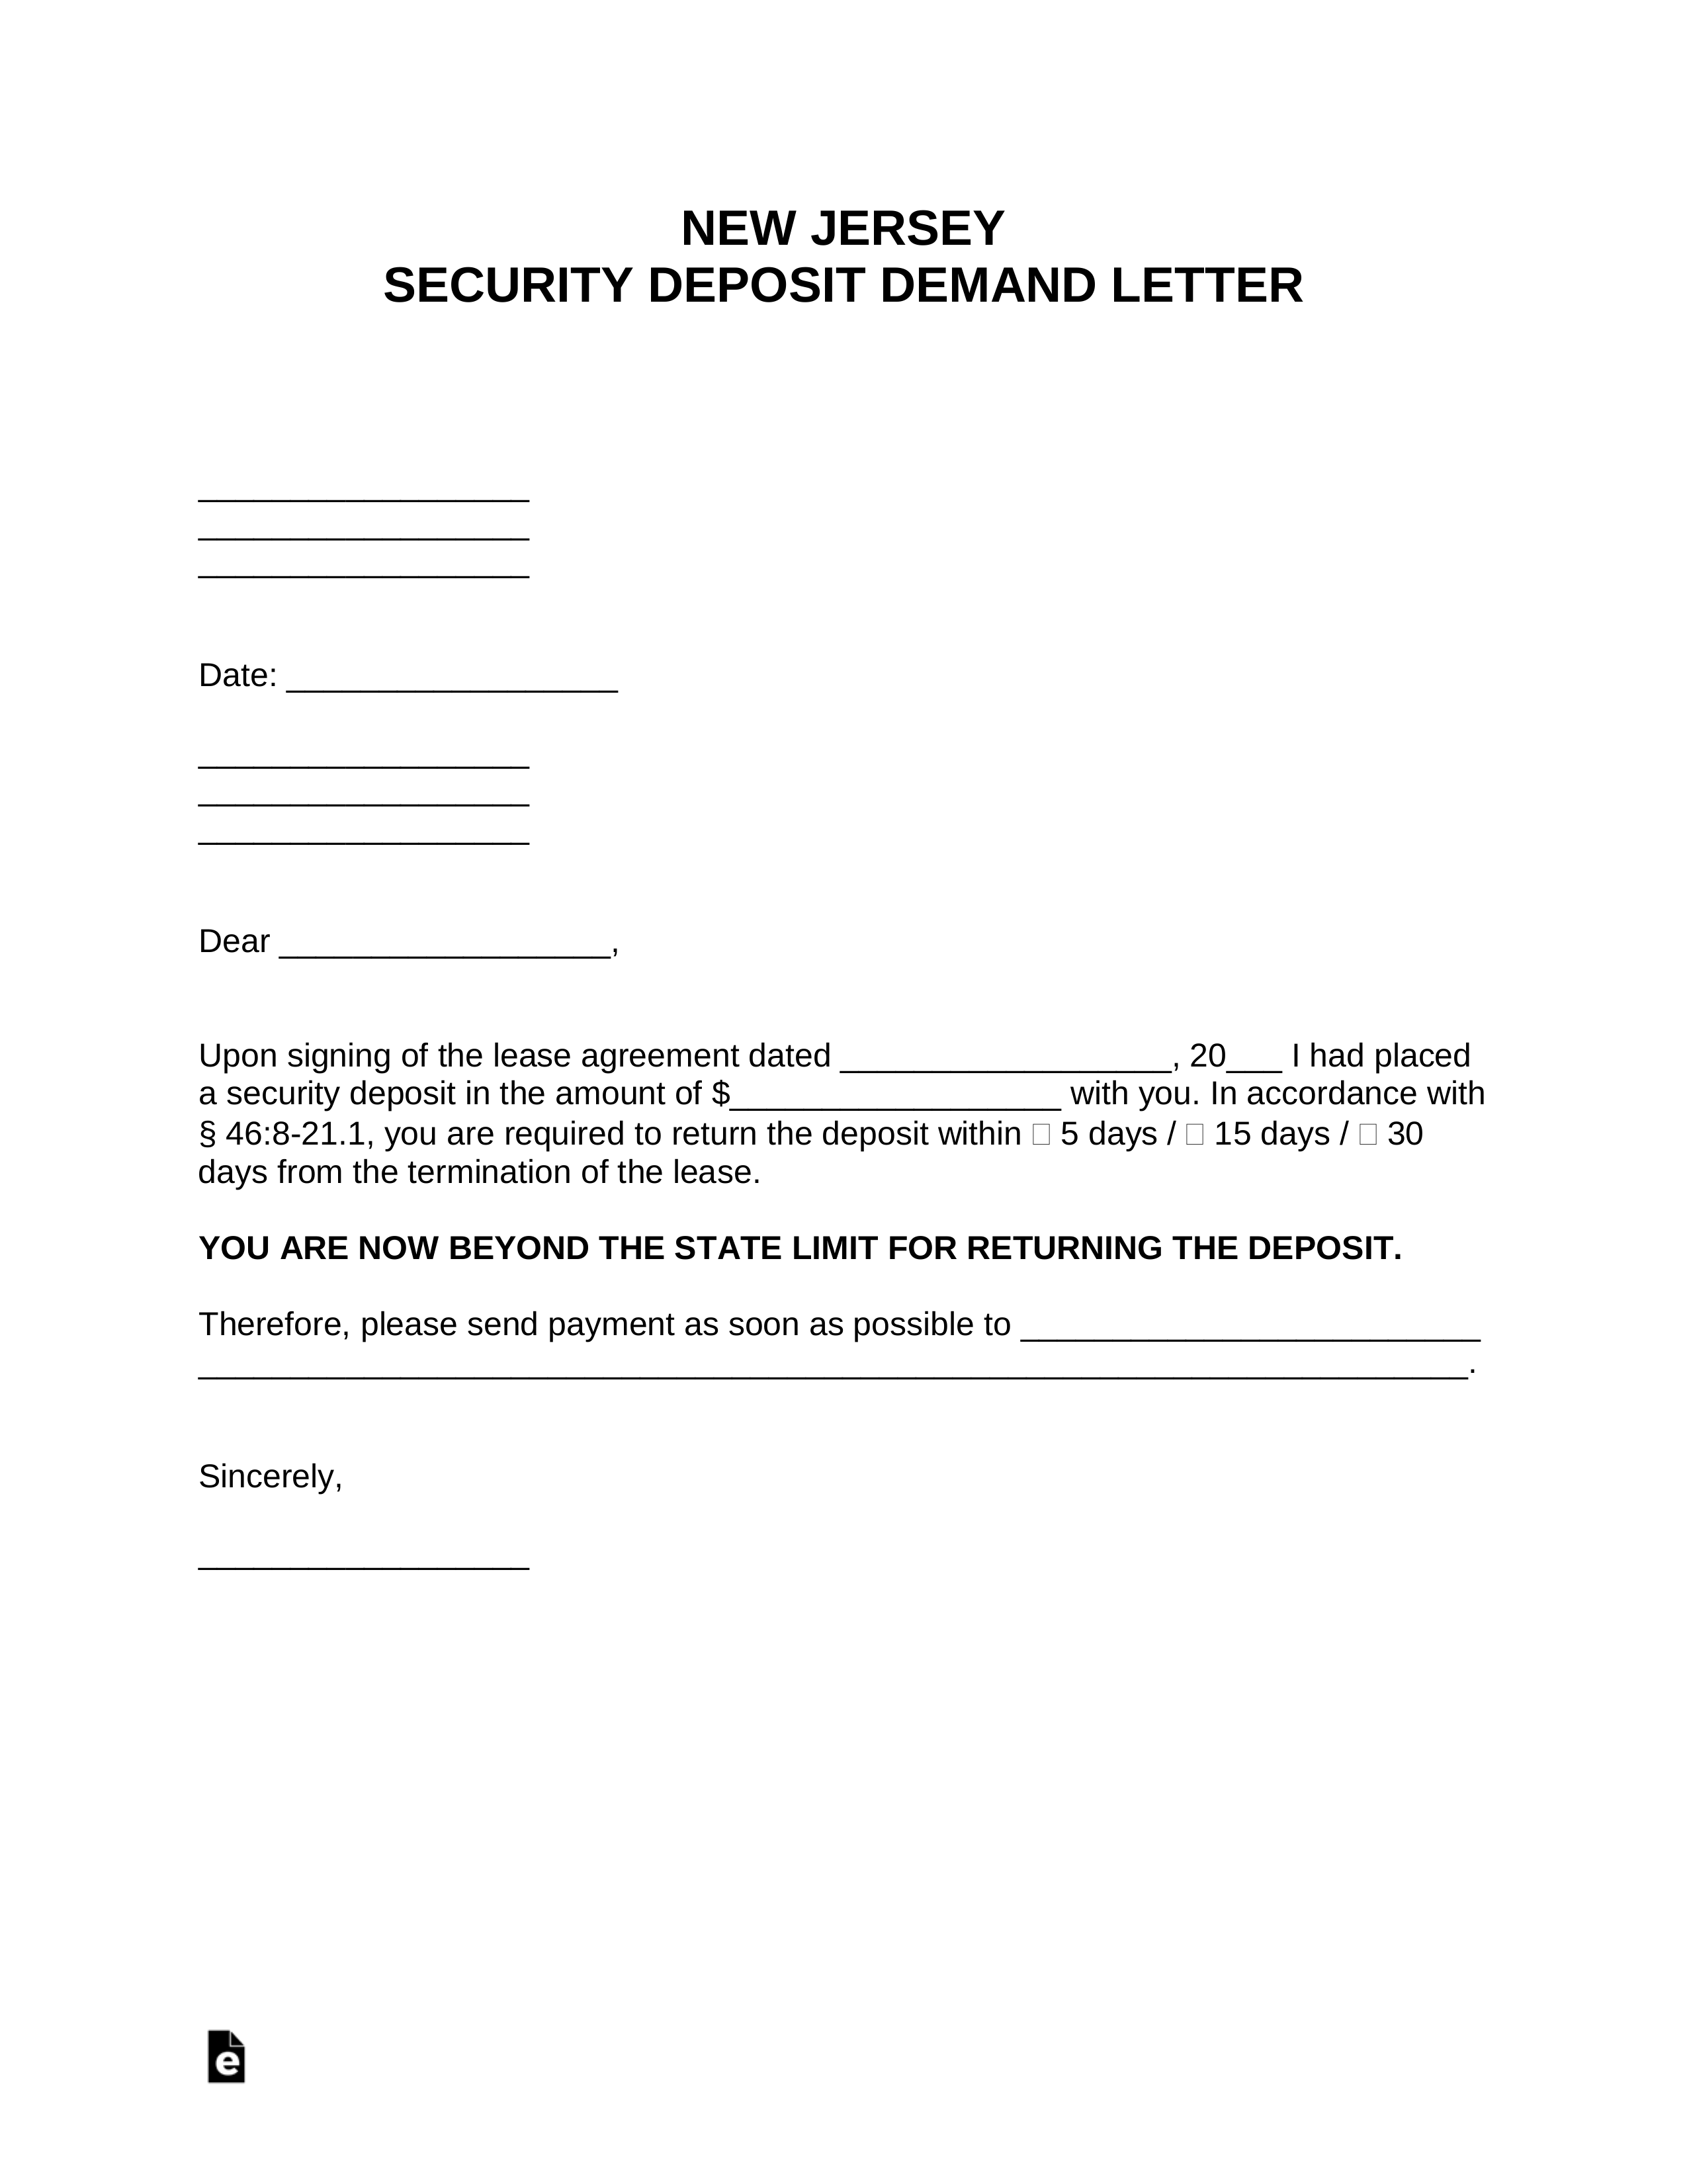 Free New Jersey Security Deposit Demand Letter - PDF  Word – eForms Throughout Security Deposit Return Letter Template For Security Deposit Return Letter Template